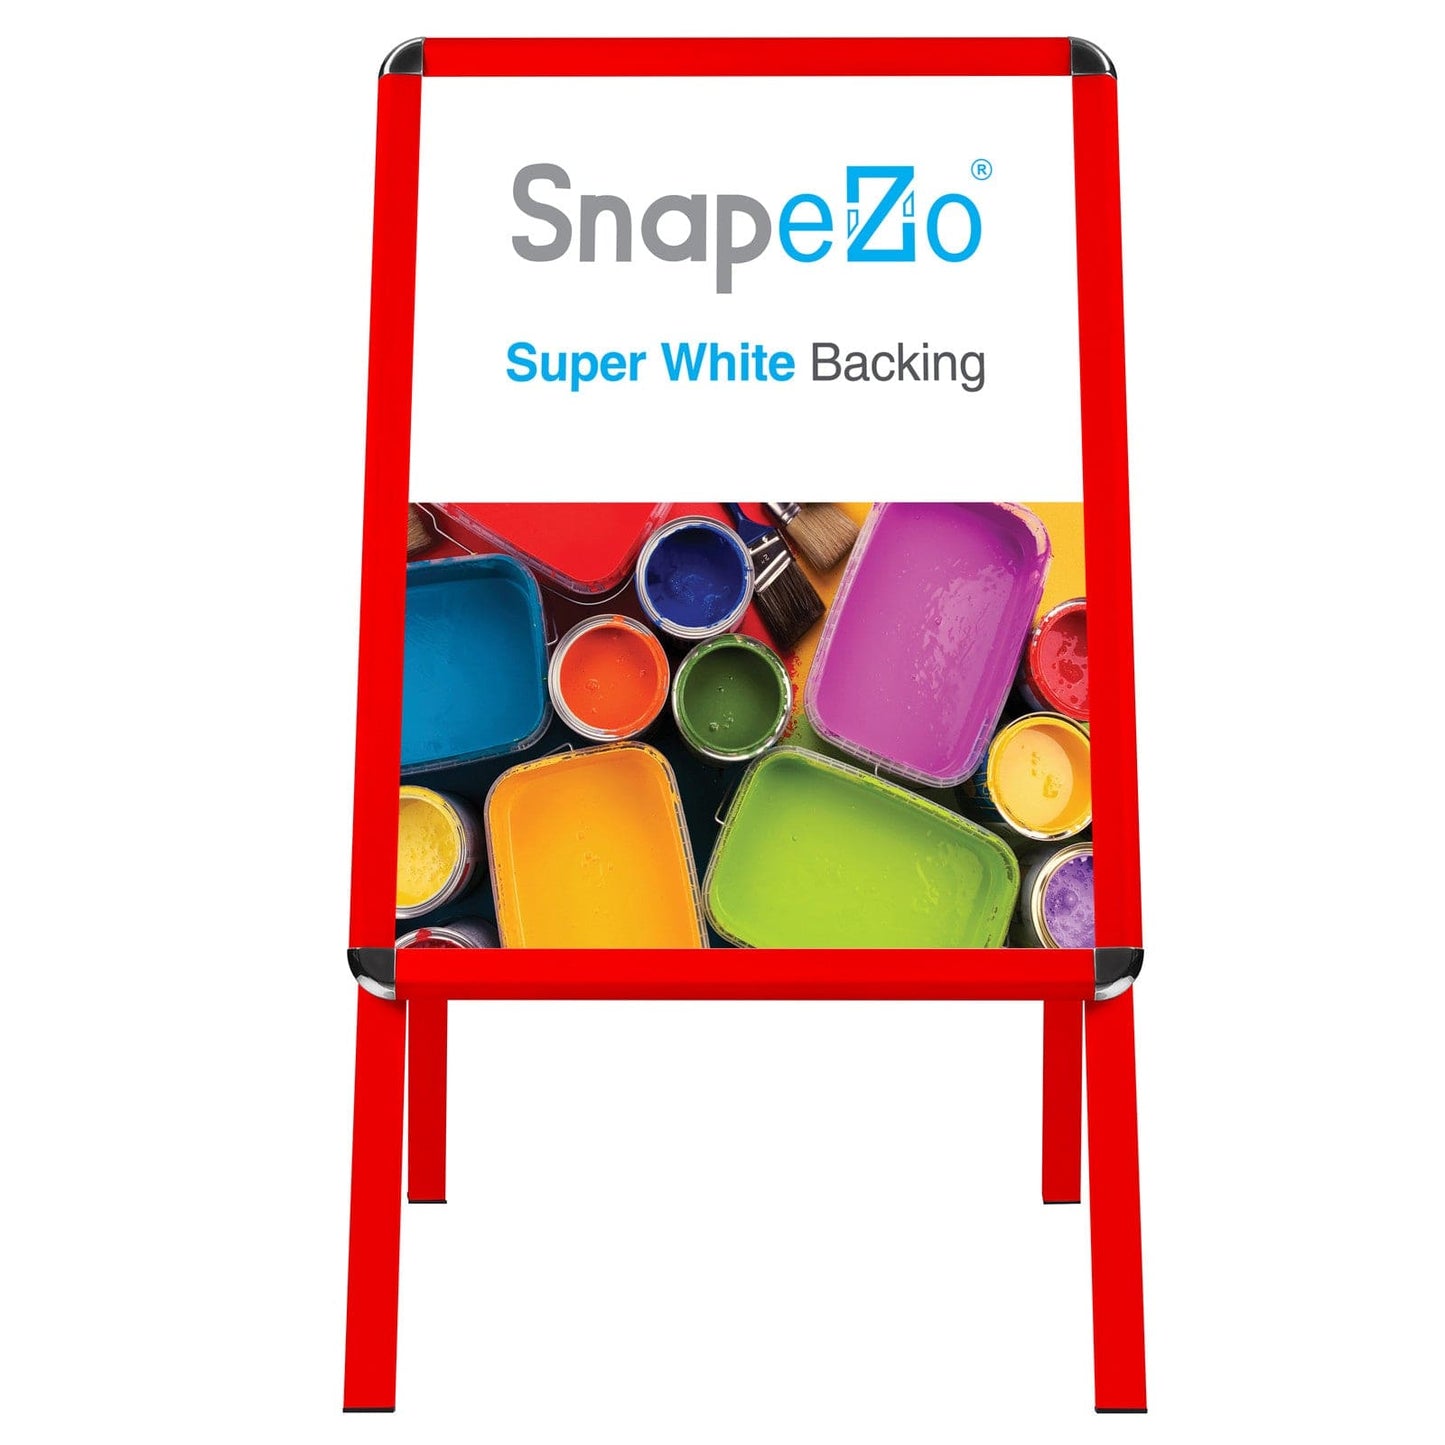 22x28 Red SnapeZo® Sidewalk Sign - 1.25" Profile - Snap Frames Direct